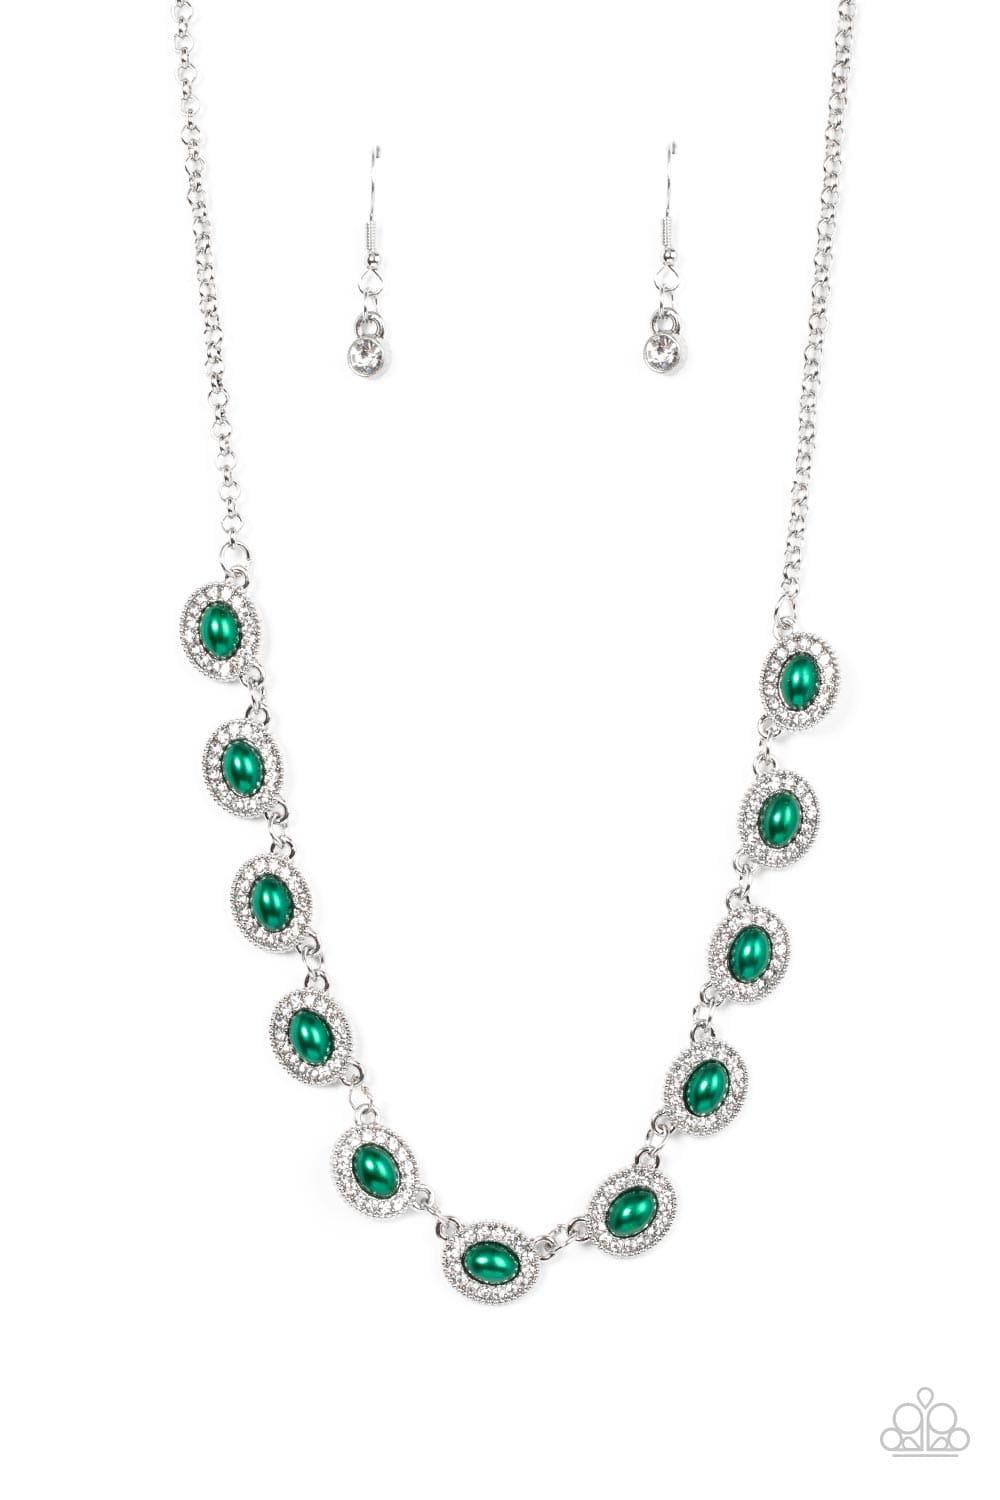 Paparazzi Accessories - Modest Masterpiece - Green Necklace - Bling by JessieK